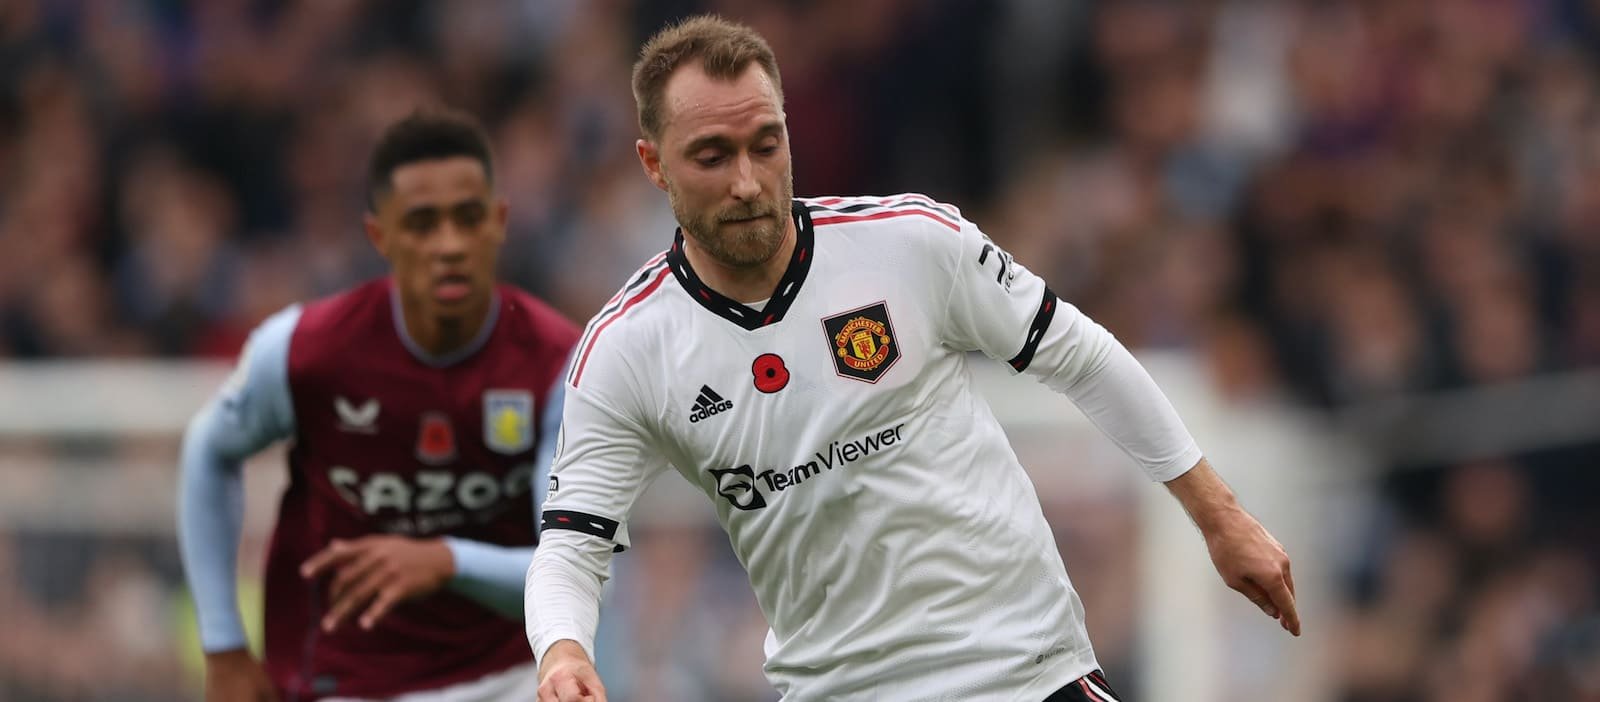 Christian Eriksen achieves unbelievable record with Manchester United appearance against Copenhagen – Man United News And Transfer News